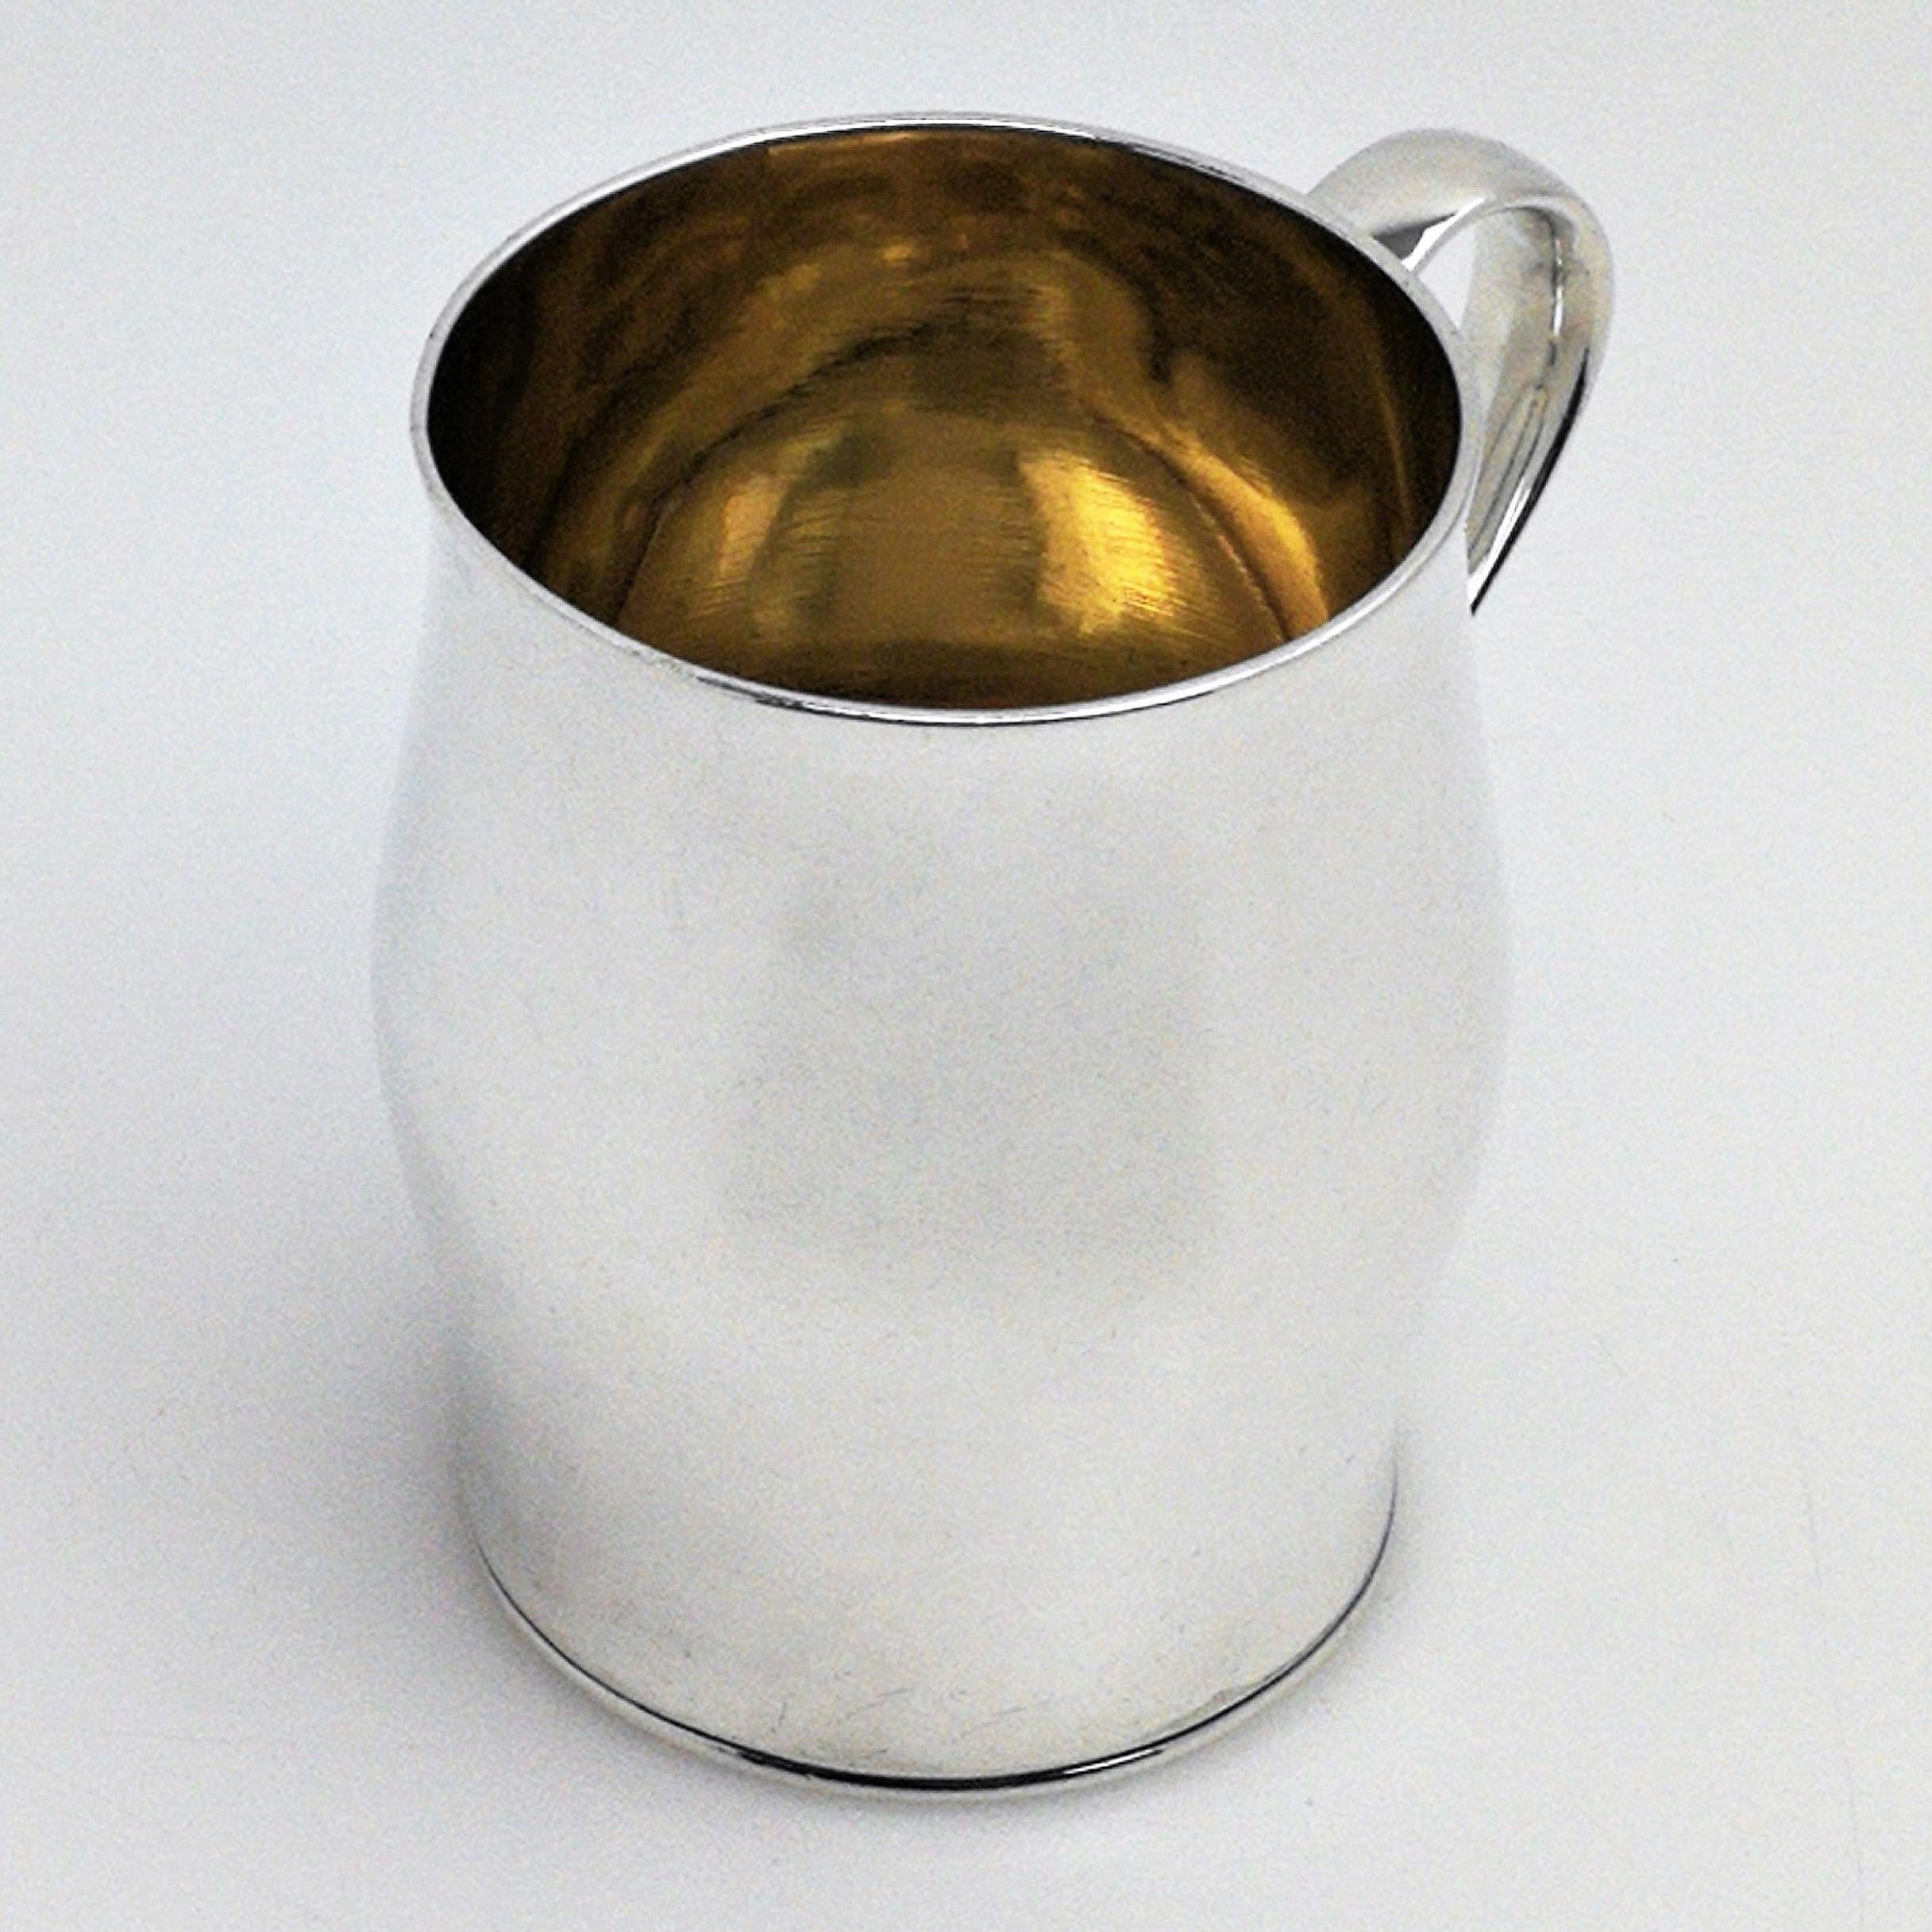 A lovely antique George III solid silver christening mug with a plain bellied form. The mug is of good weight and has elegant proportions. It has a polished exterior, gilded interior and nice scroll handle.
 
 Made in Chester in 1765 by Richard